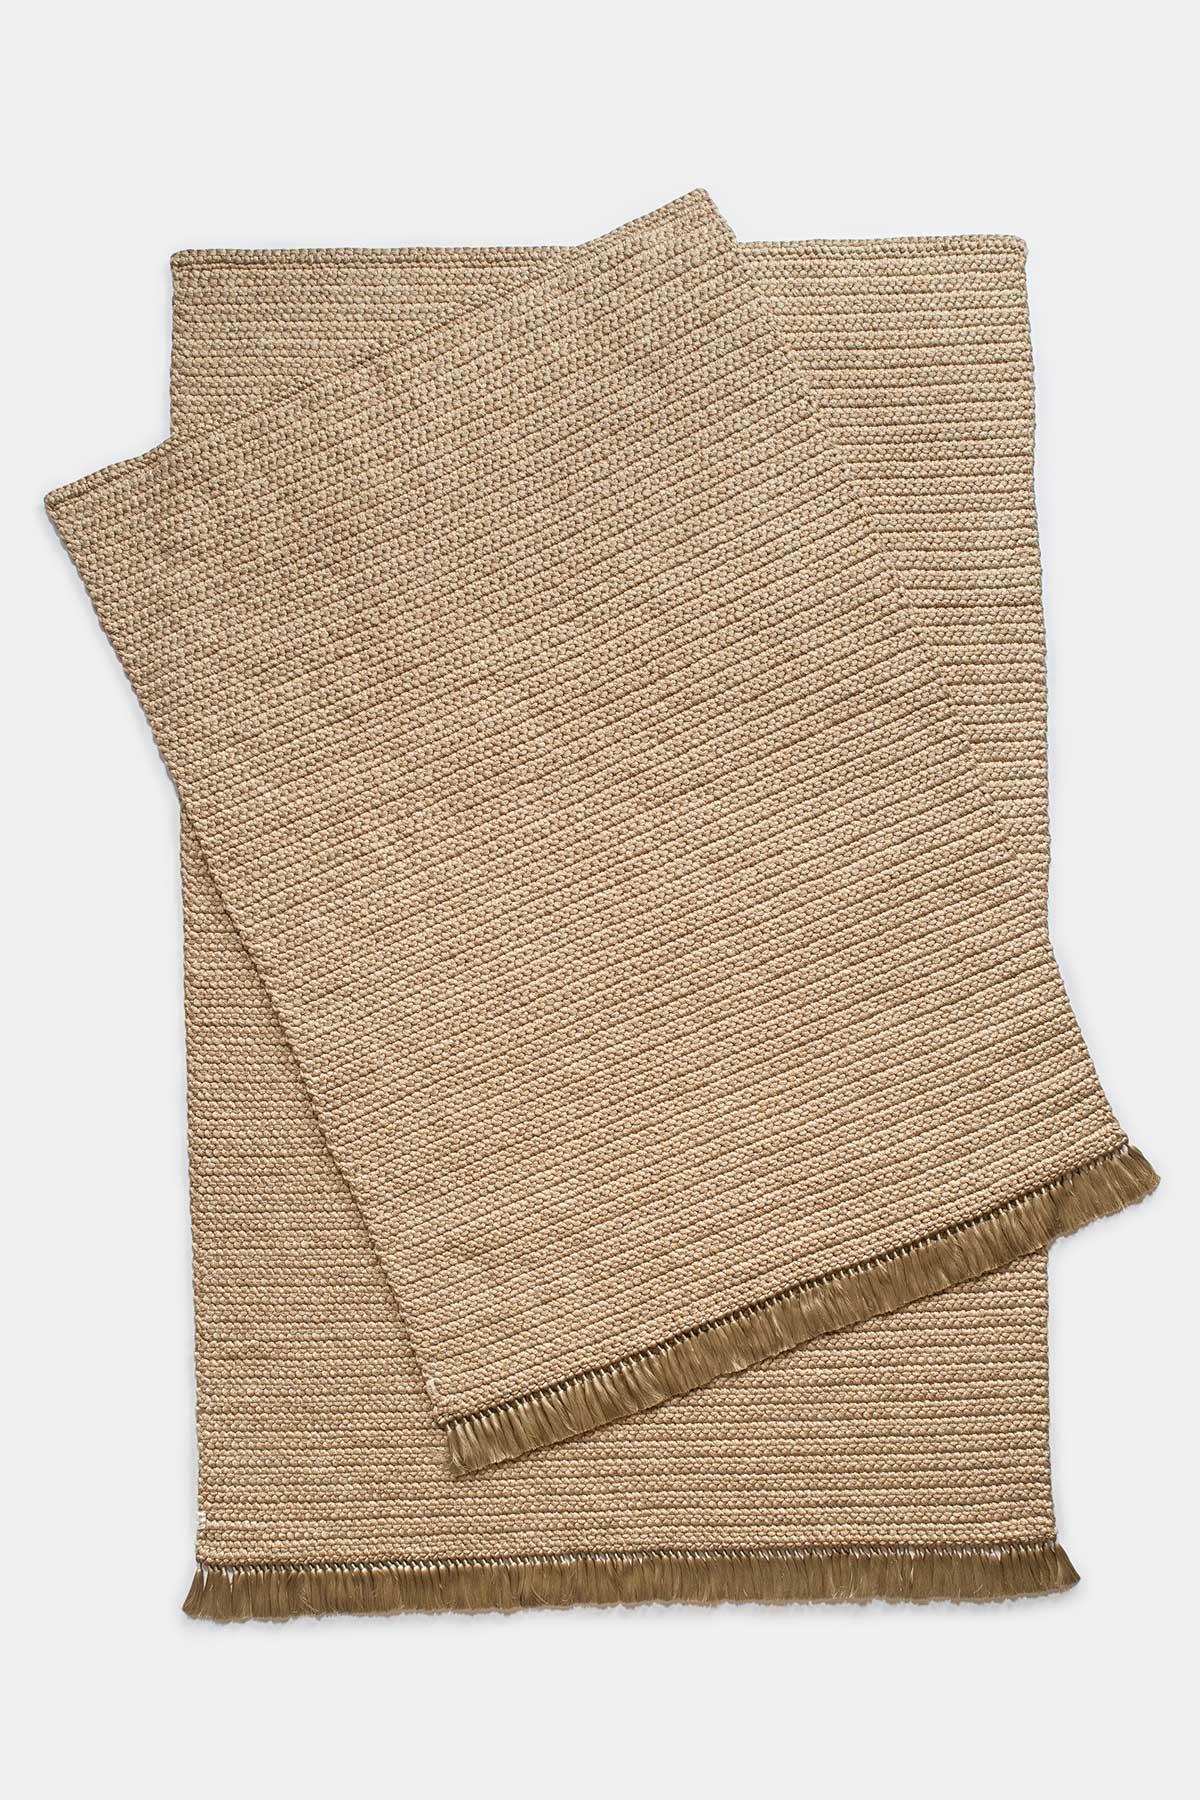 Contemporary Handmade Crochet Thick Rug 170X240 cm in Golden Beige Wine Colors For Sale